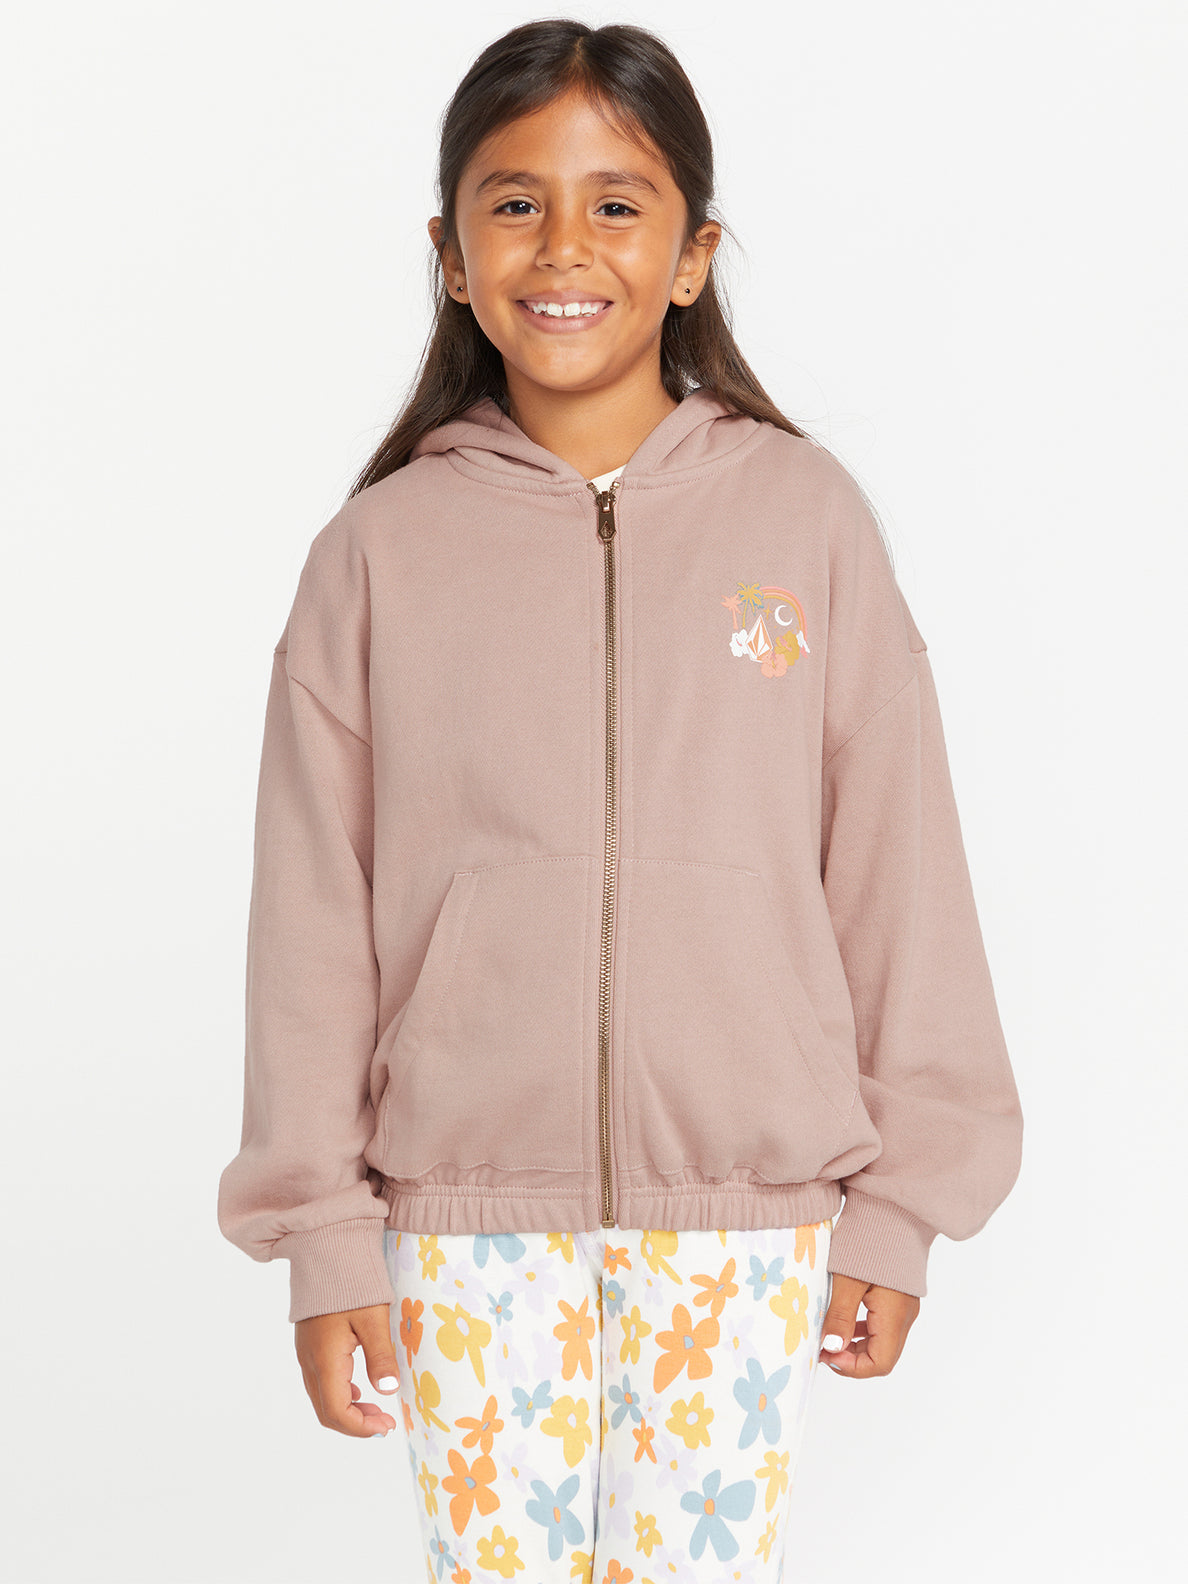 Girls Zippety Dudette Jacket - Winter Orchid (R4832300_ORC) [1]